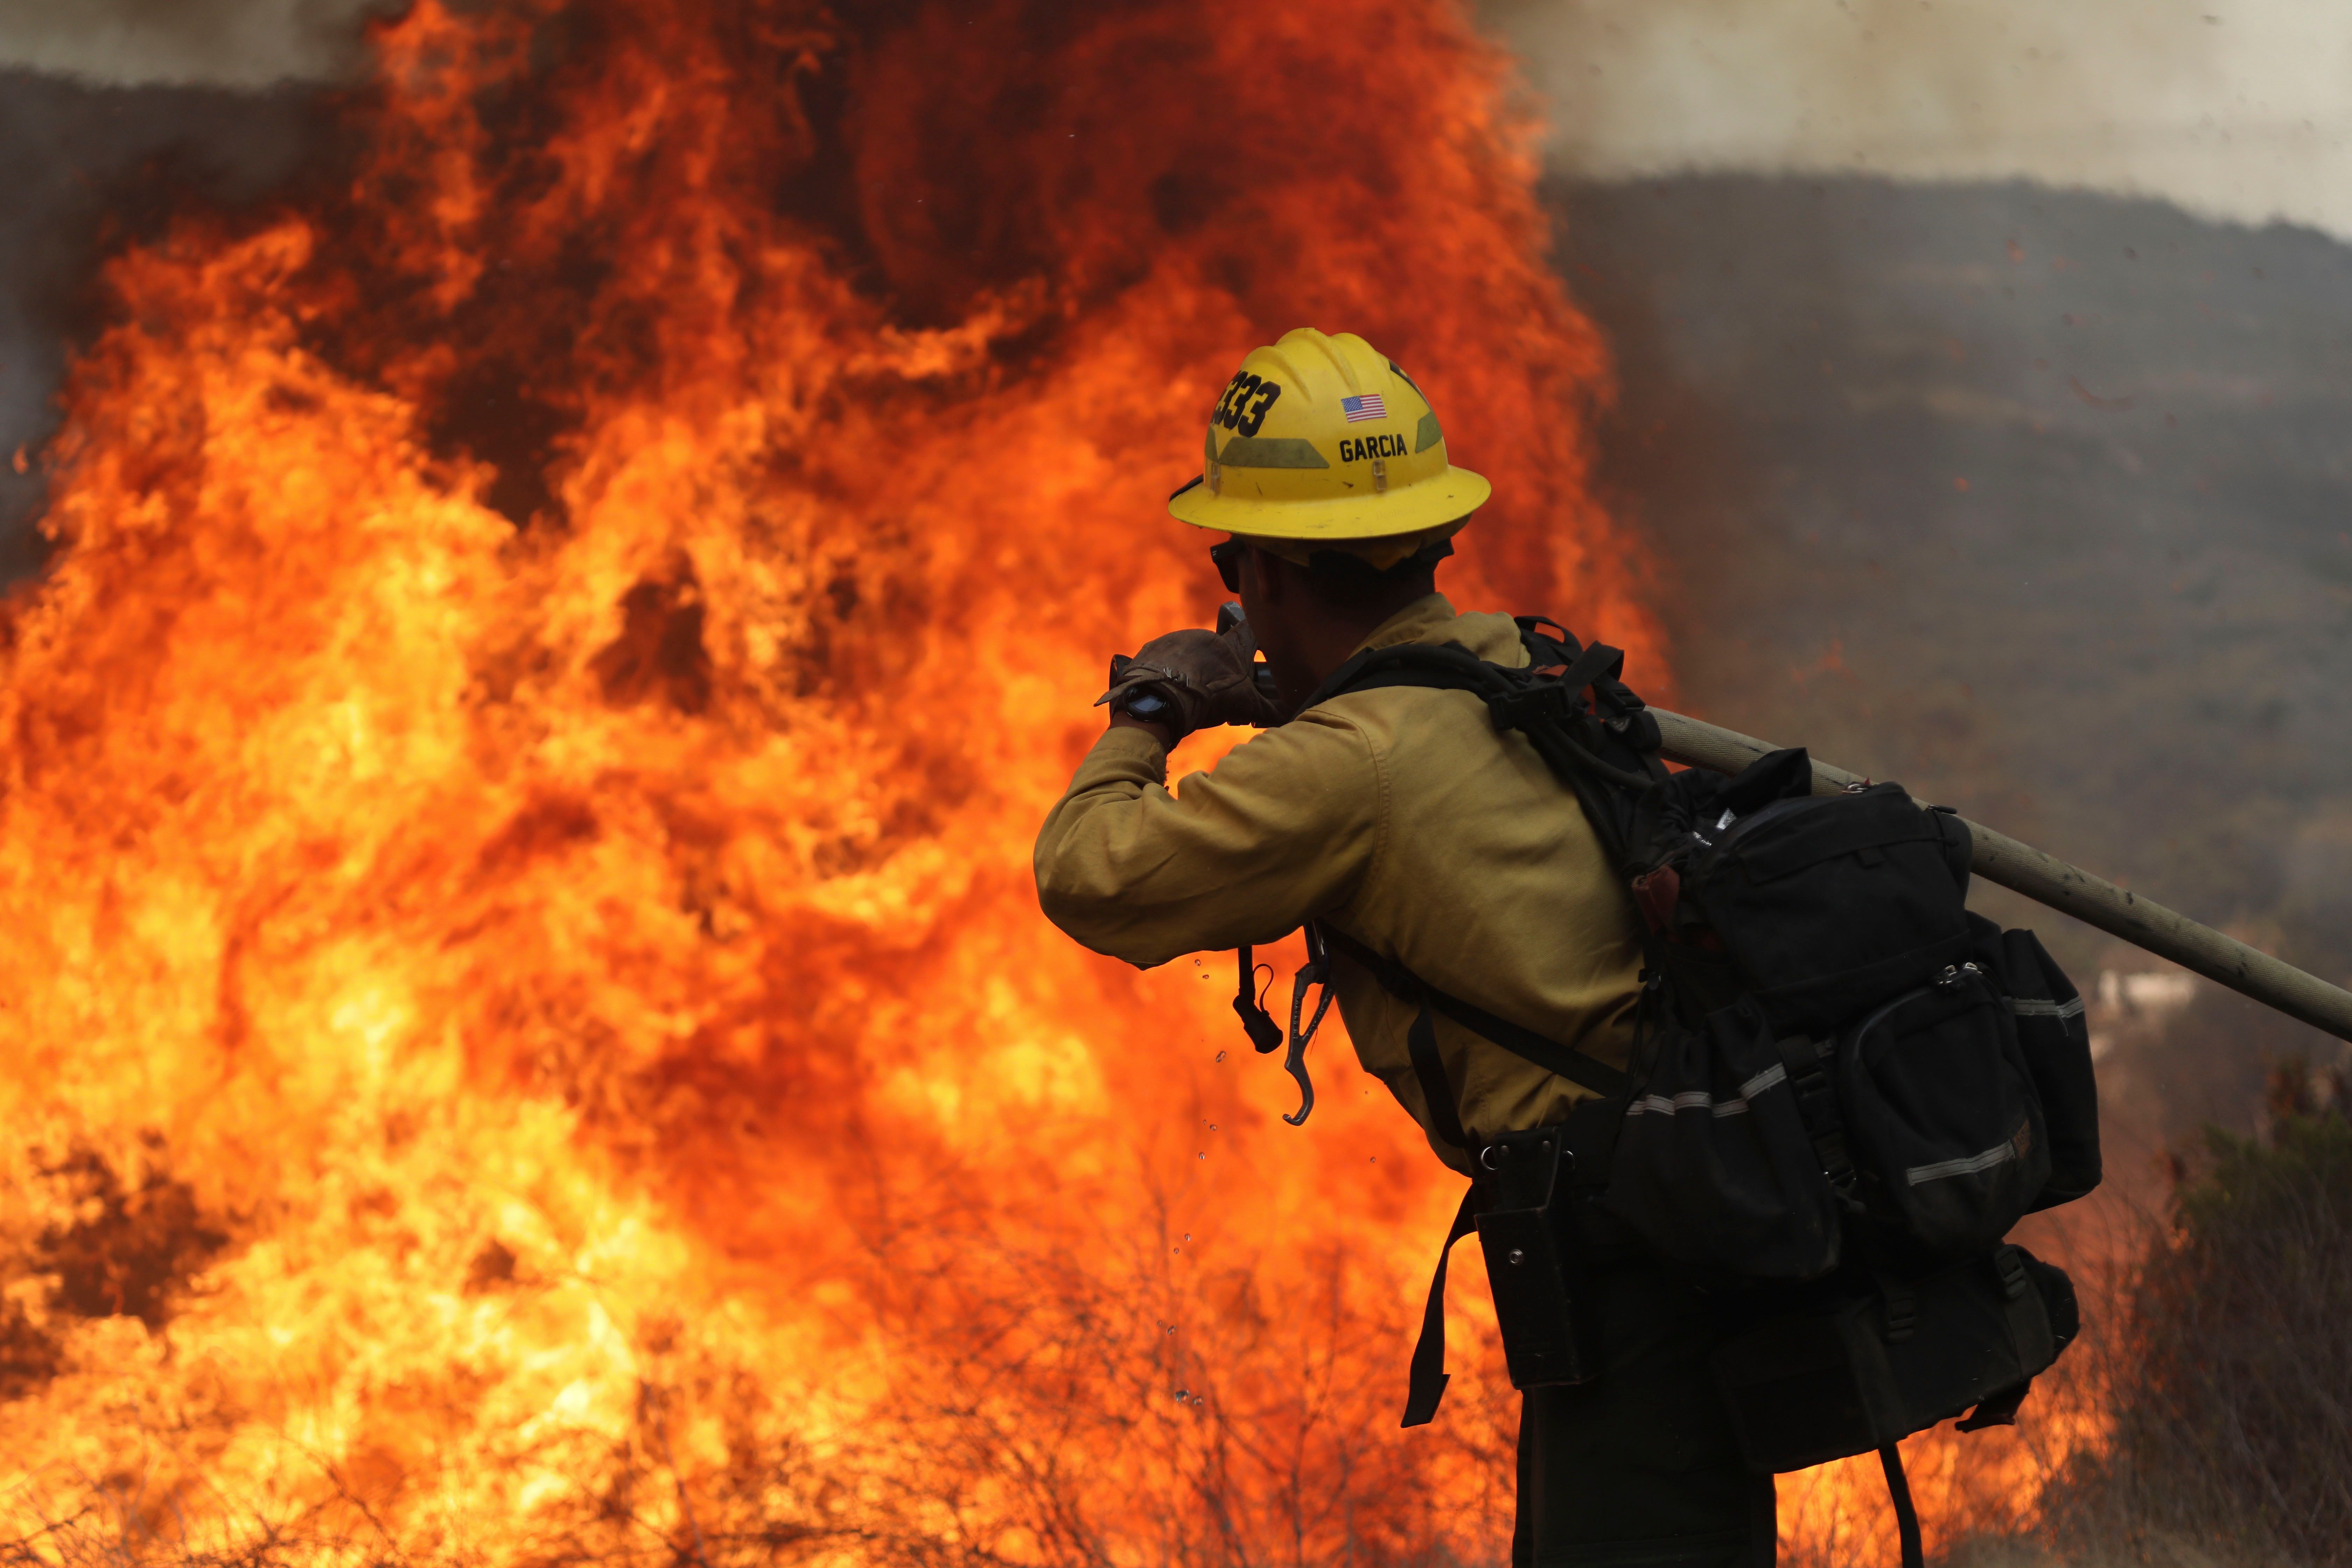 High temperatures in California have fueled fires in various parts of the state.